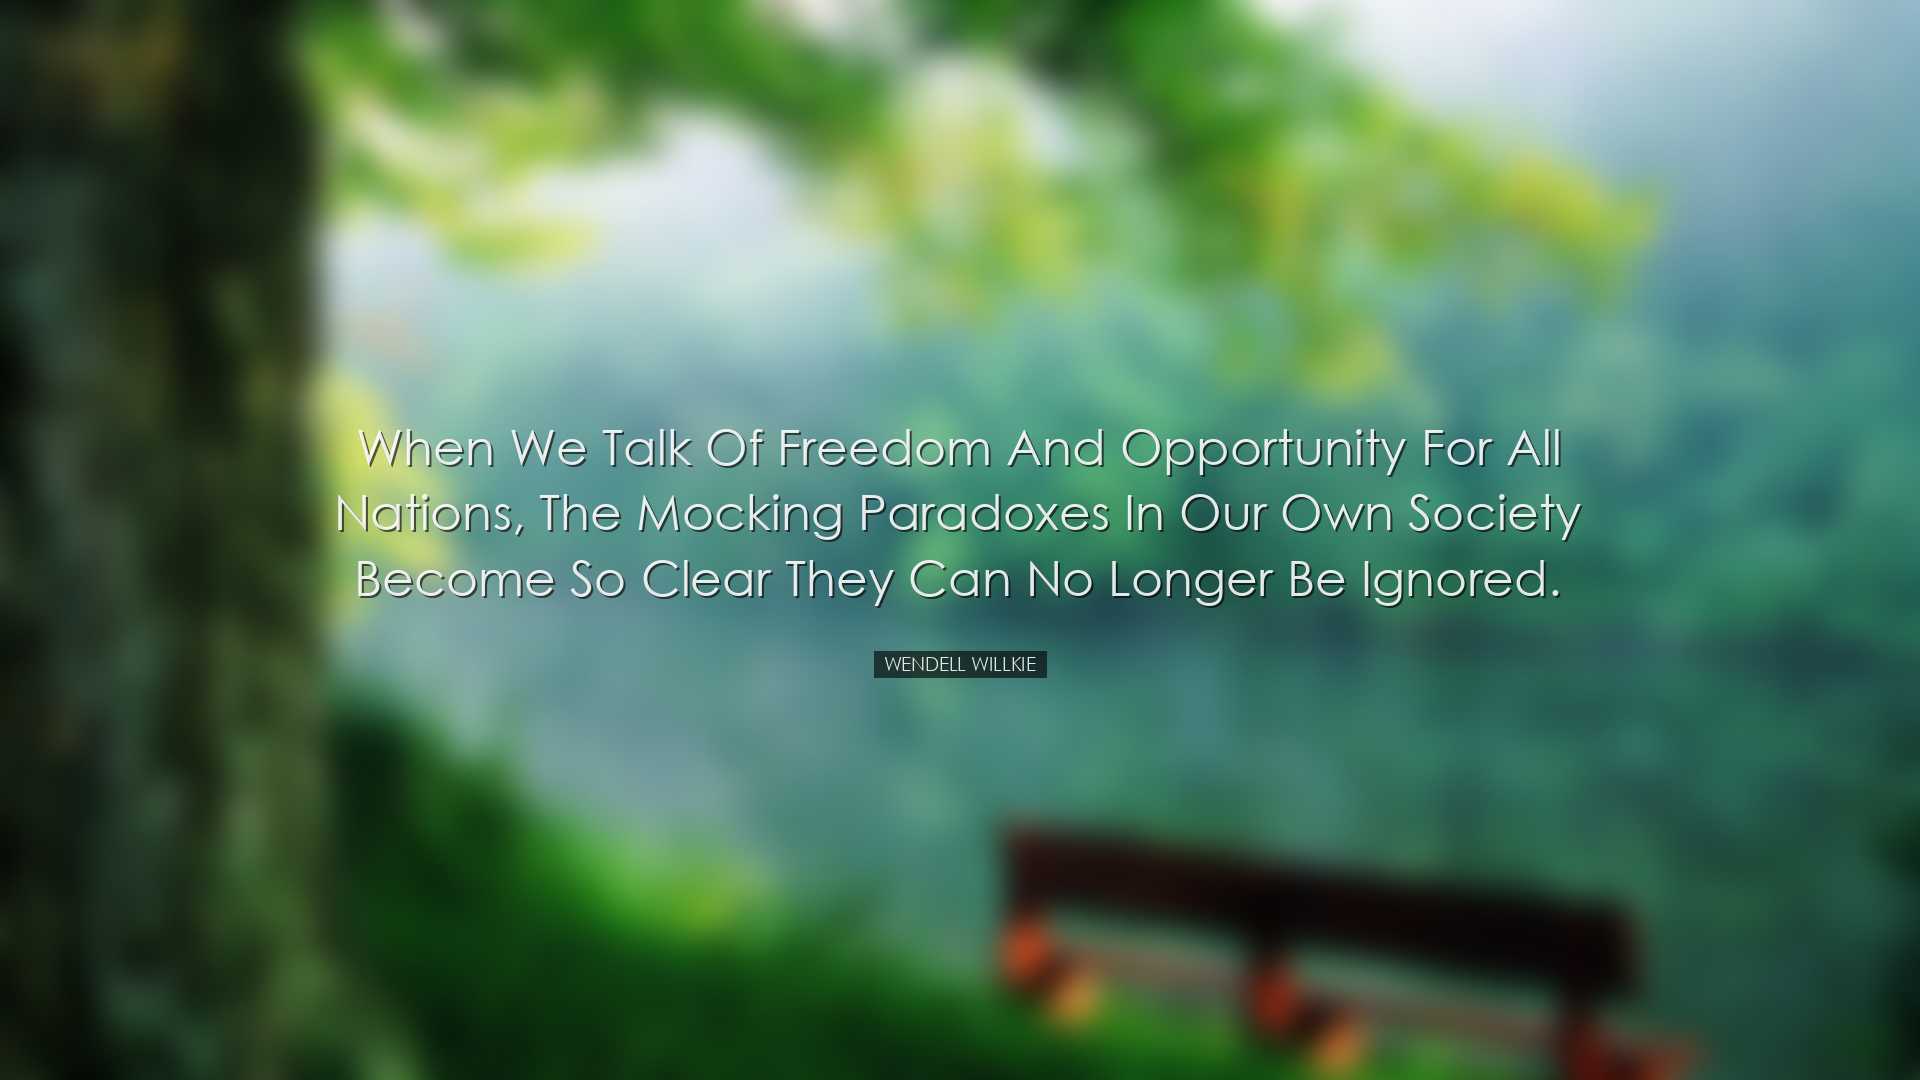 When we talk of freedom and opportunity for all nations, the mocki